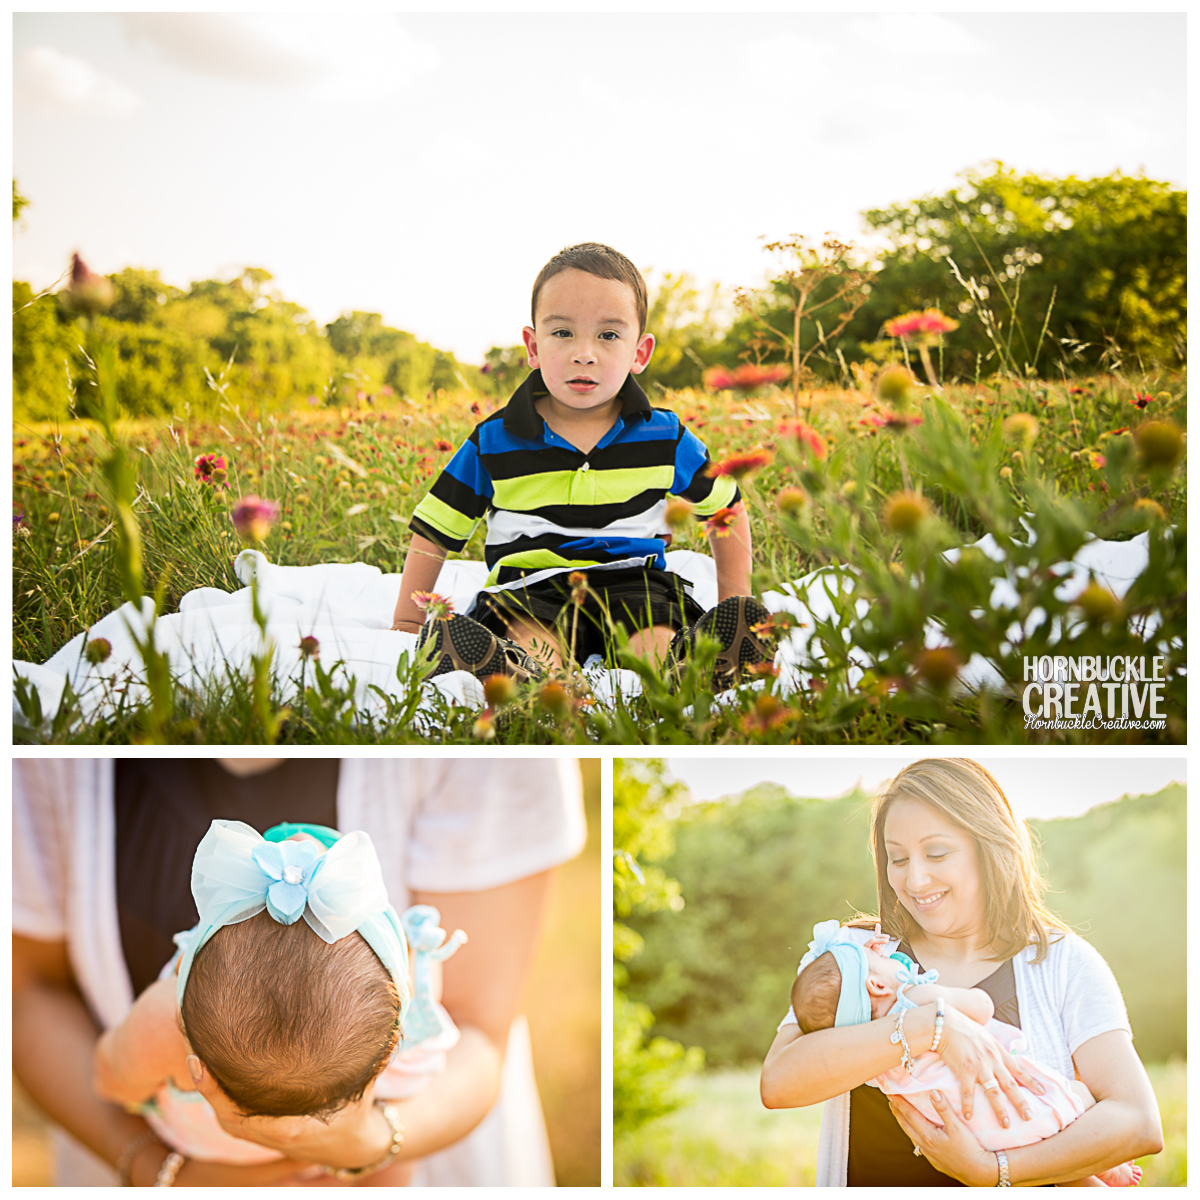 Campbell Family Portrait Photography by Hornbuckle Creative